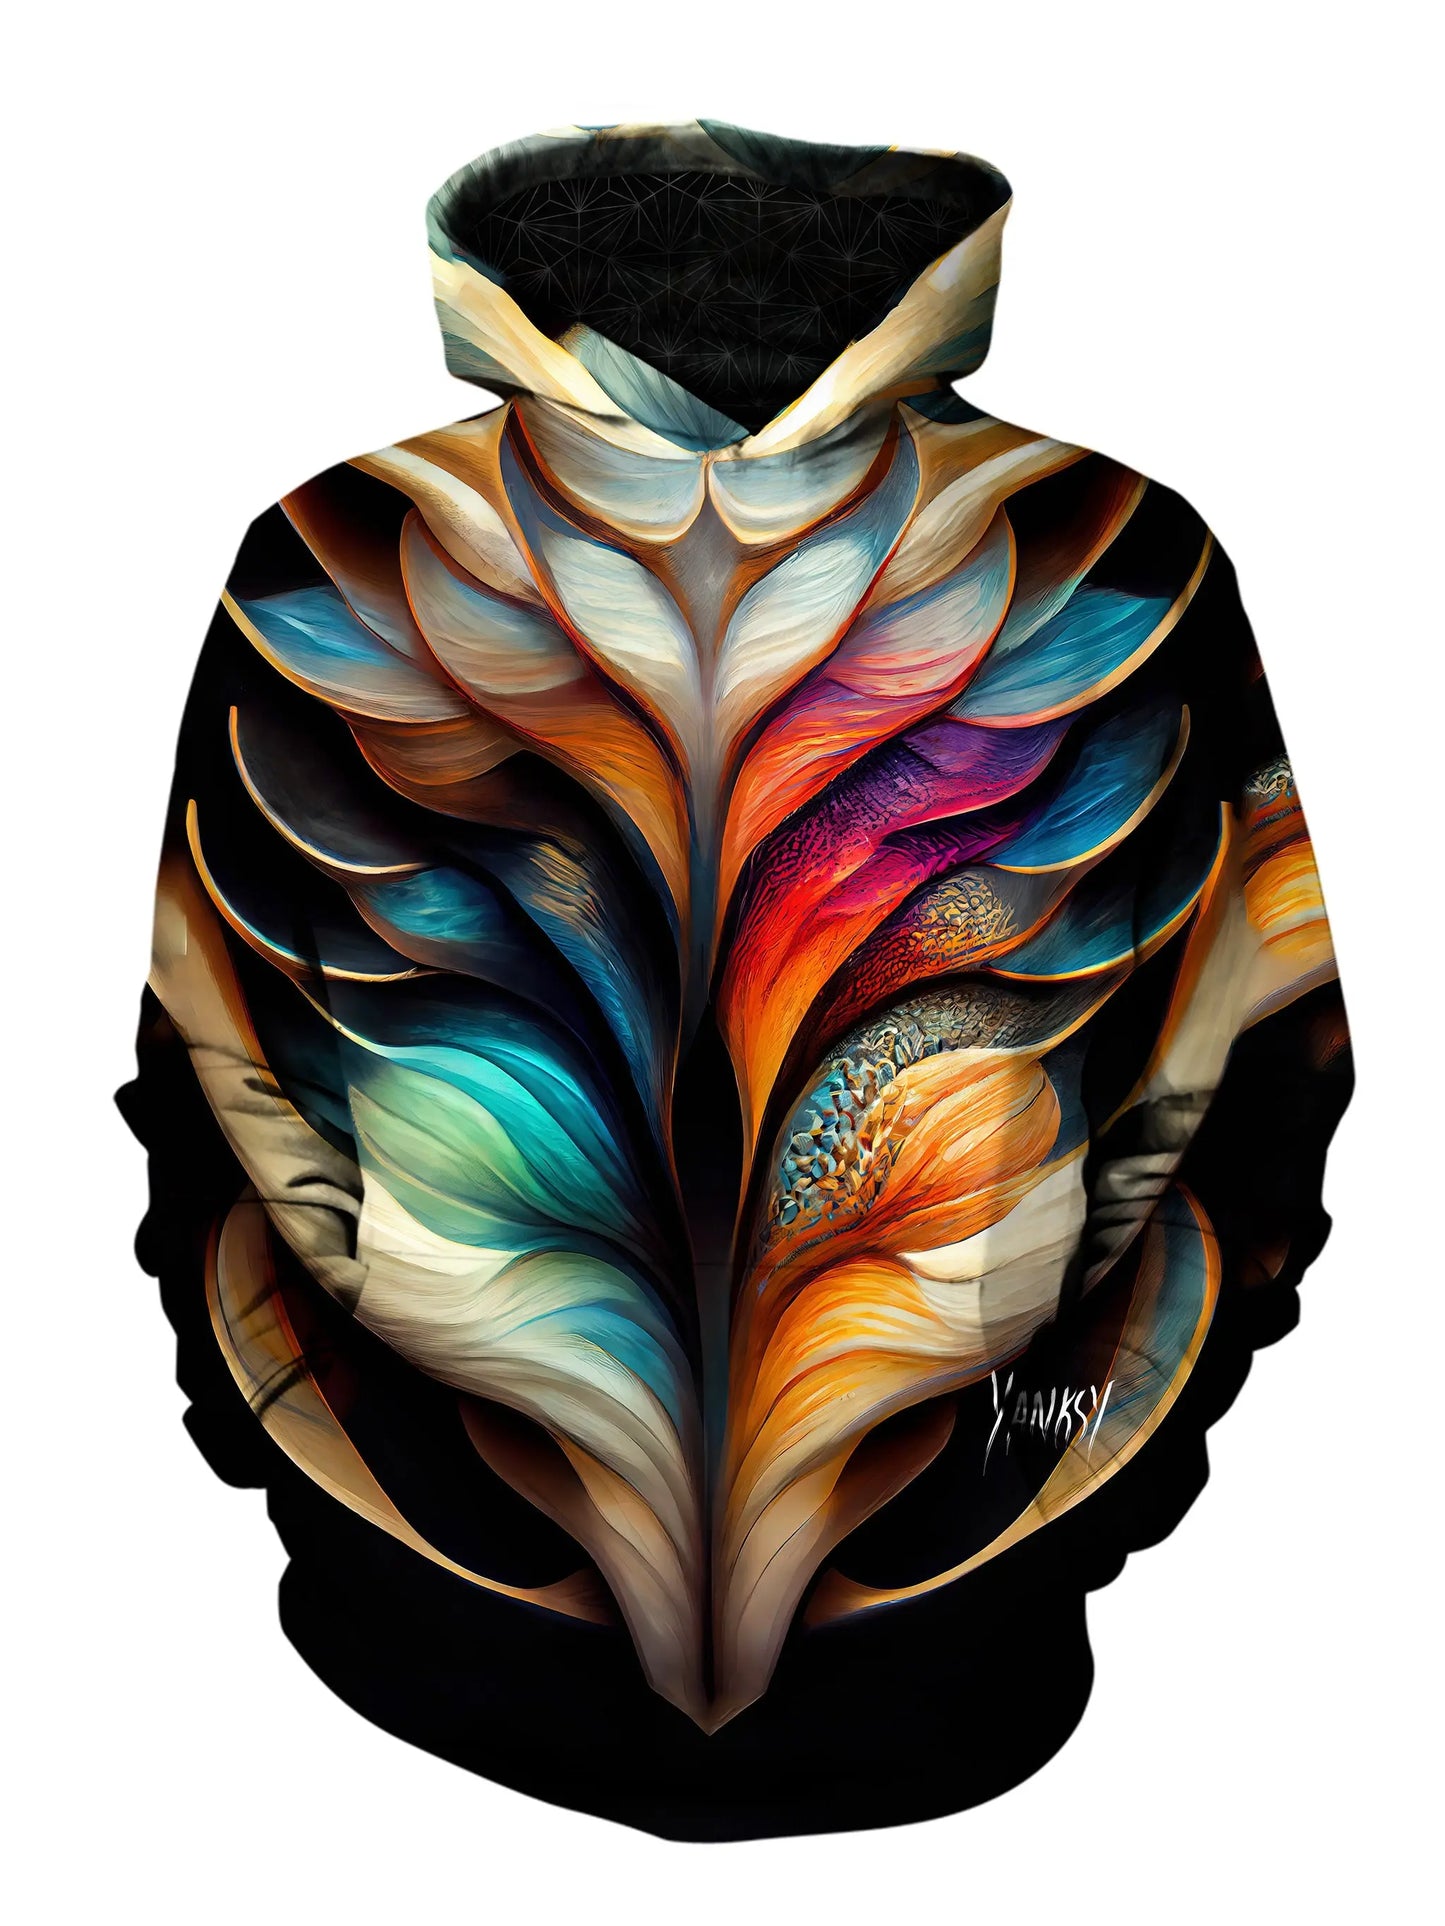 Express your creativity and individuality with this one-of-a-kind trippy pullover hoodie